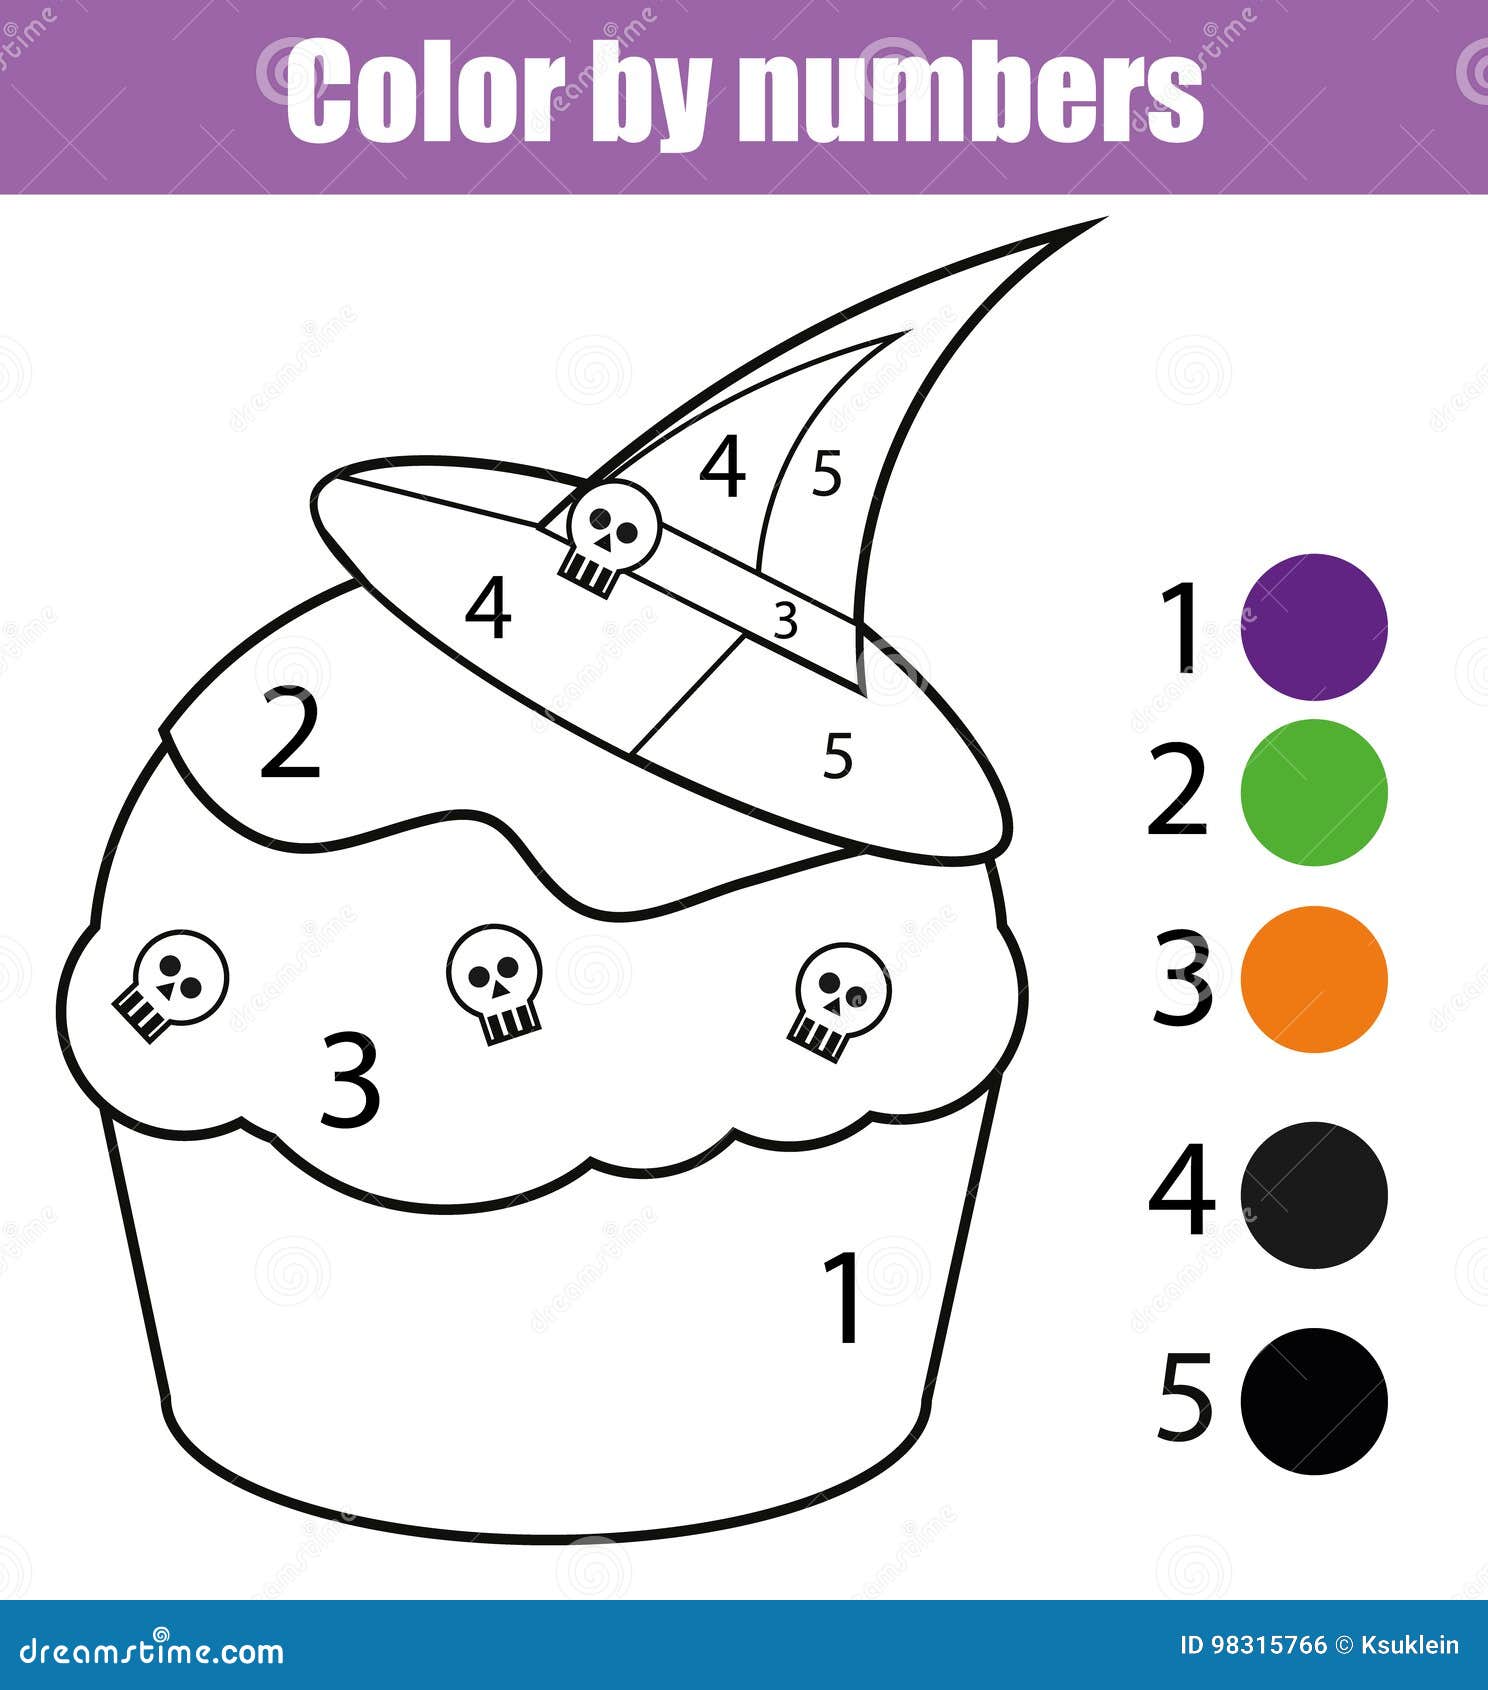 Coloring page with halloween cupcake color by numbers educational children game drawing kids activity stock vector